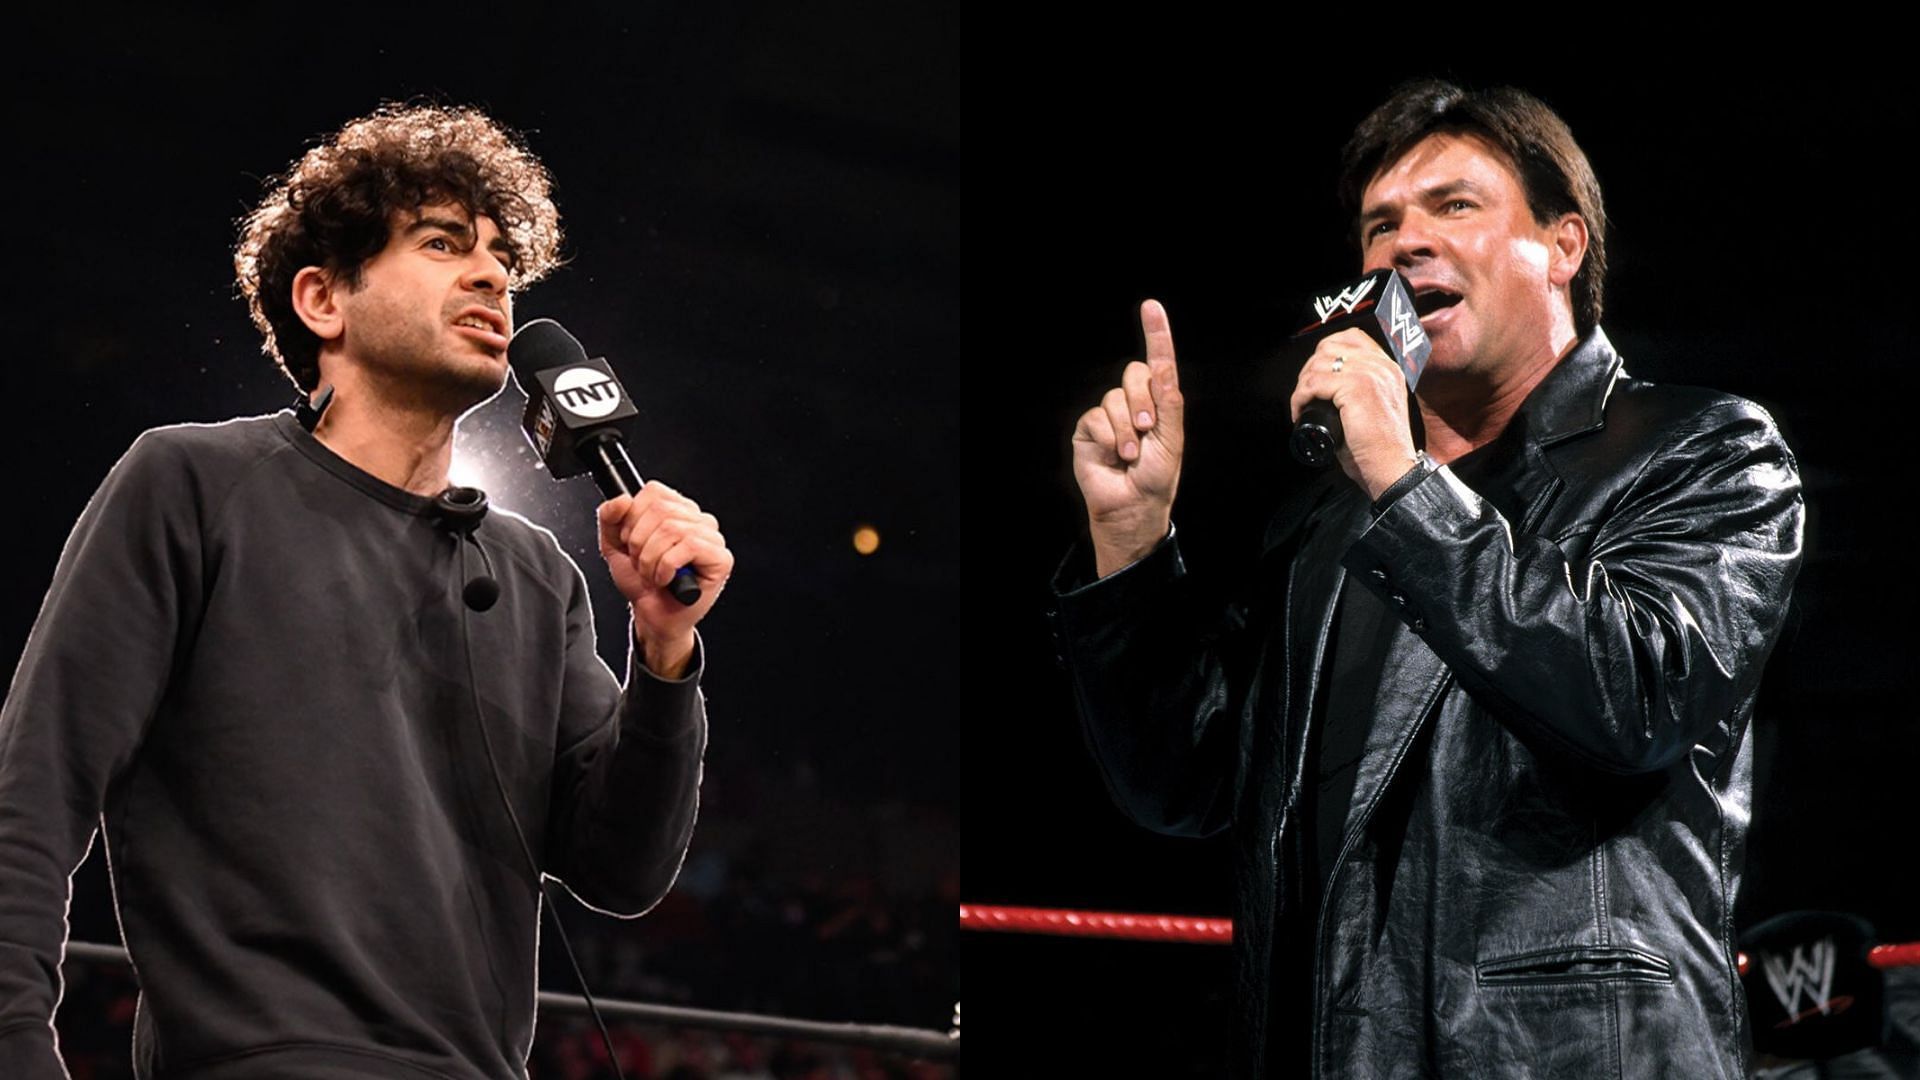 Tony Khan and Eirc Bischoff recently got into an online dispute [Photo courtesy of AEW